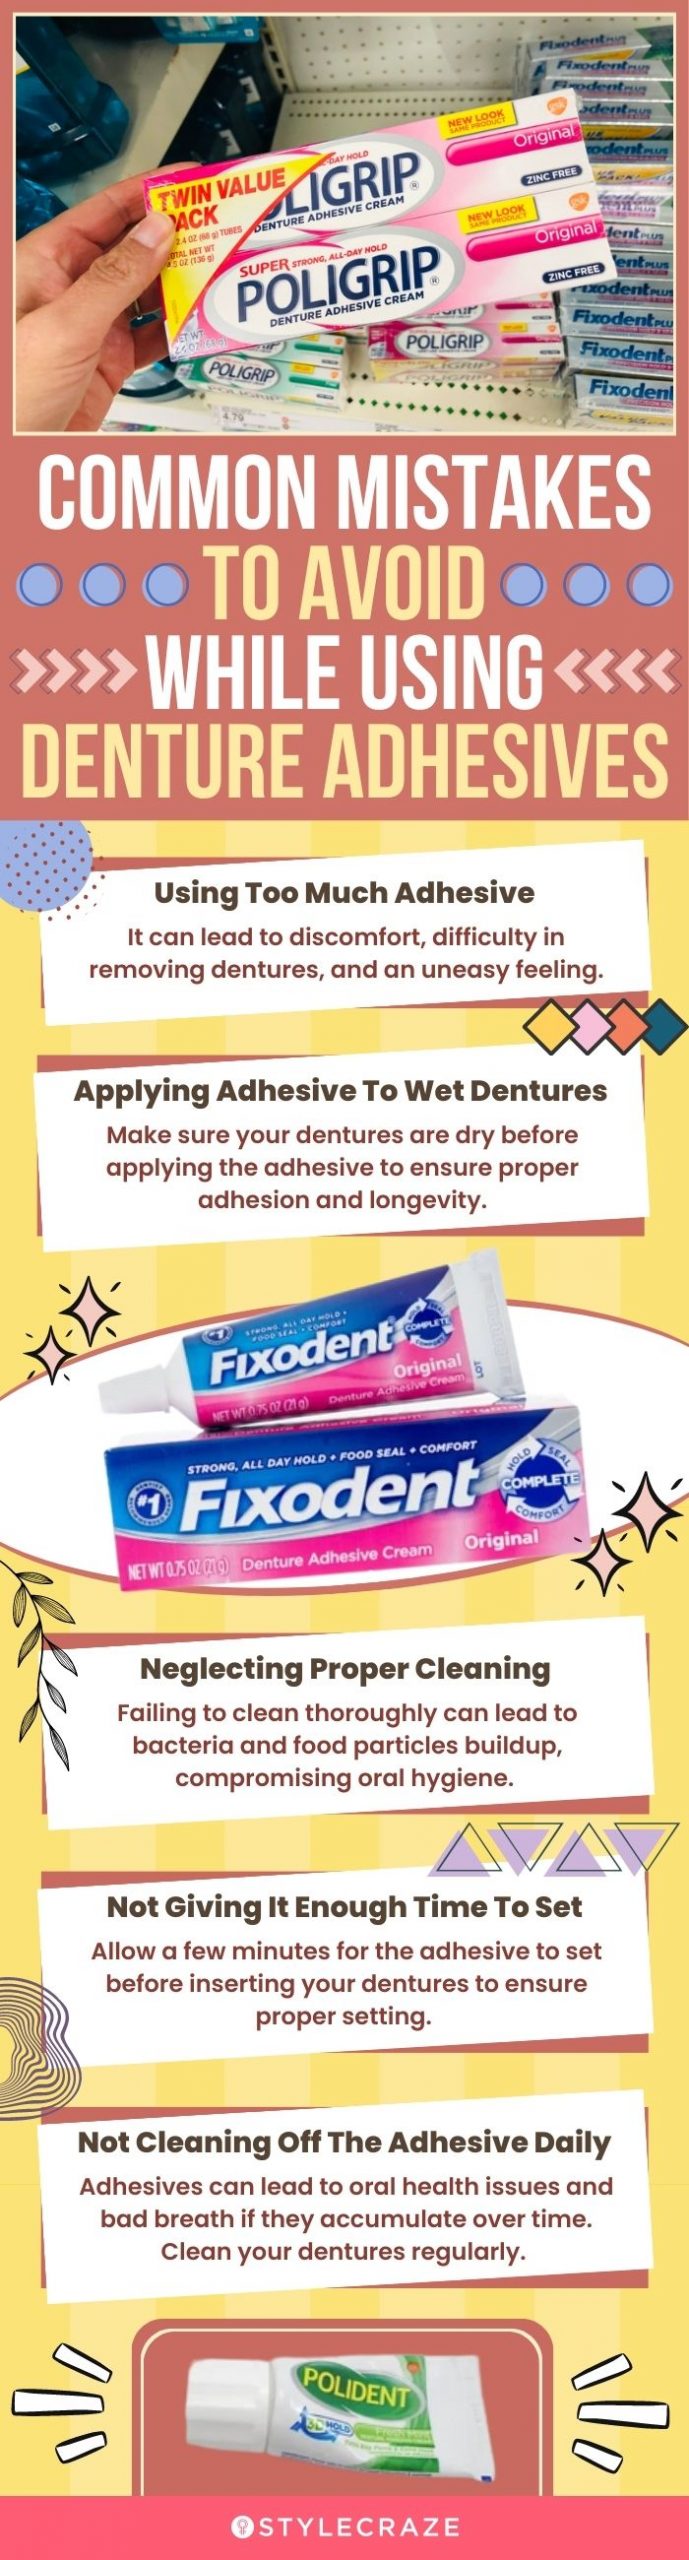 Common Mistakes To Avoid While Using Denture Adhesives (infographic)